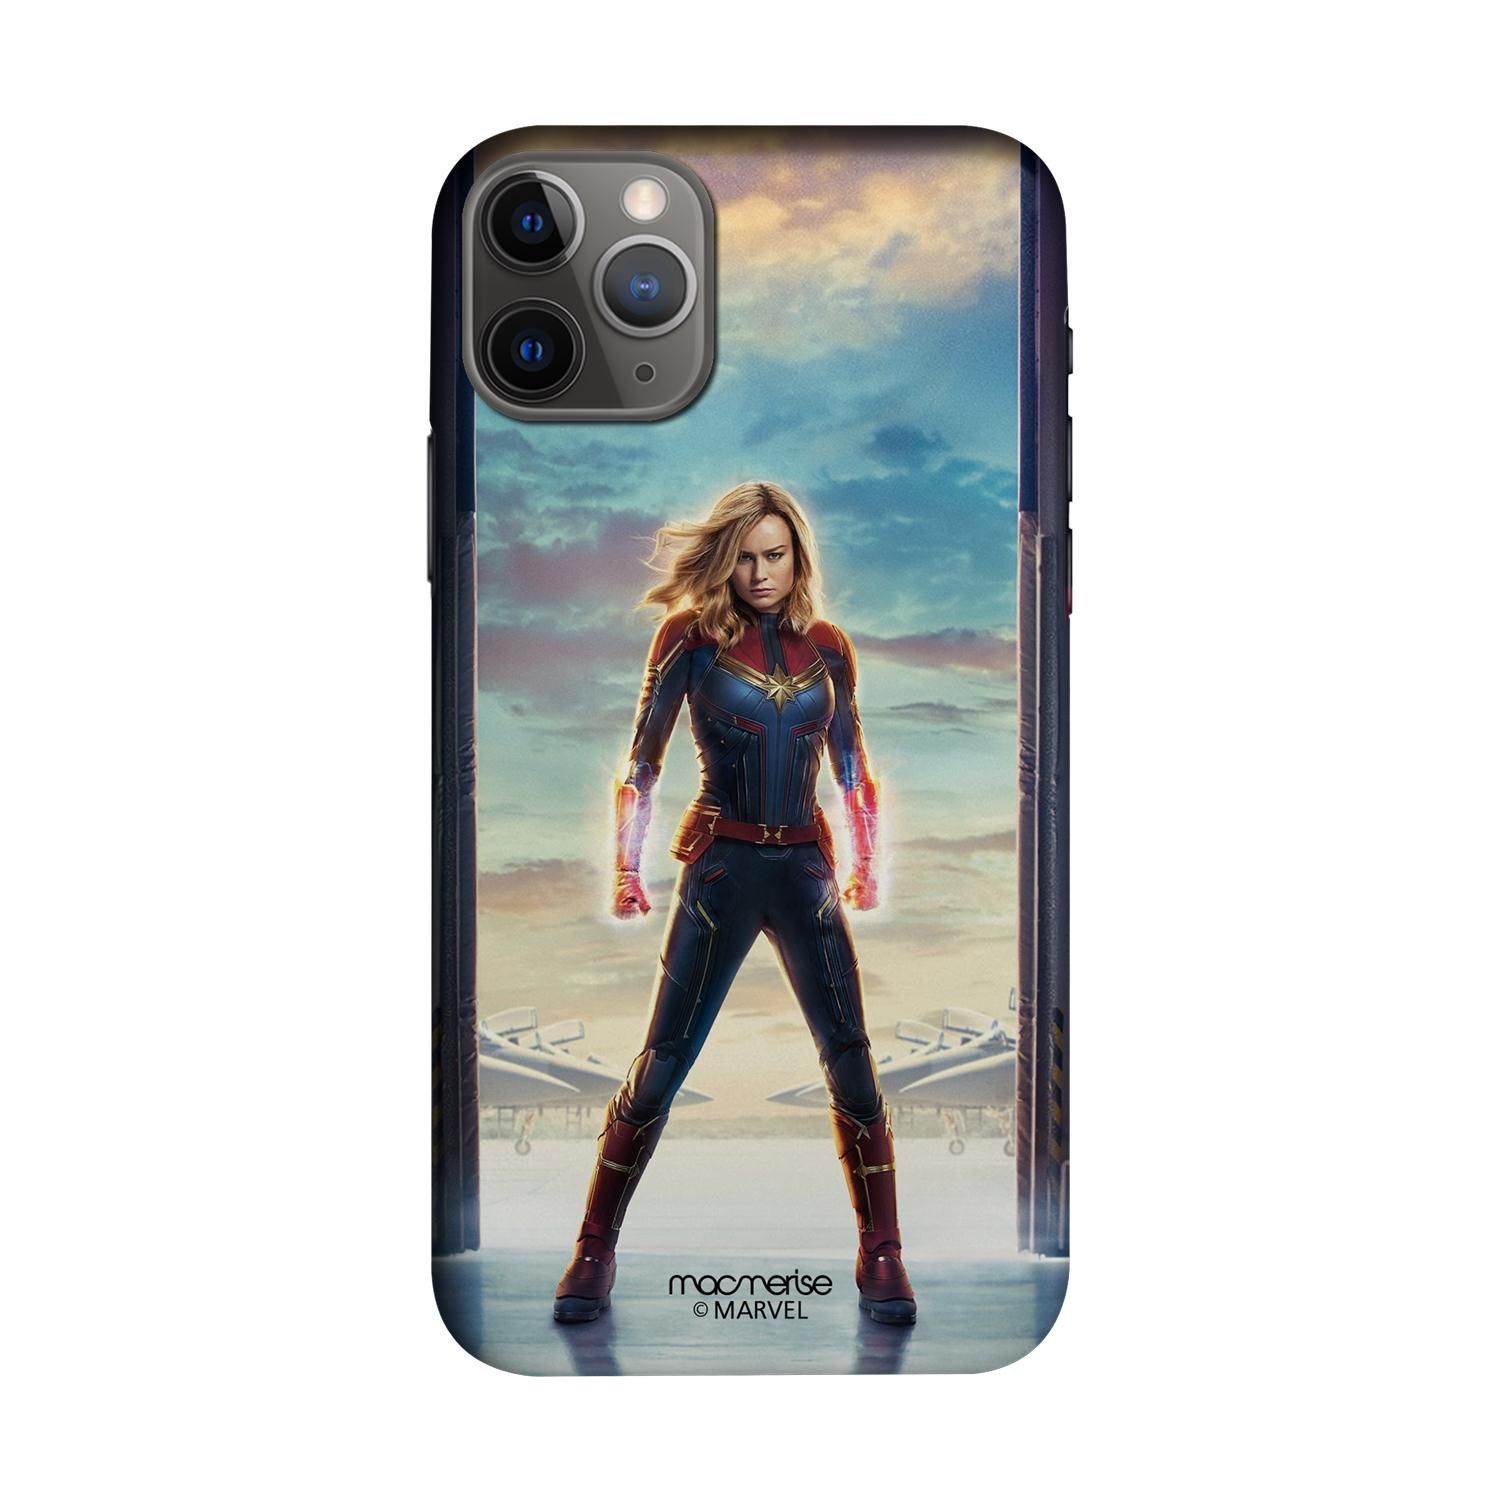 Buy Captain Marvel Poster - Sleek Phone Case for iPhone 11 Pro Max Online